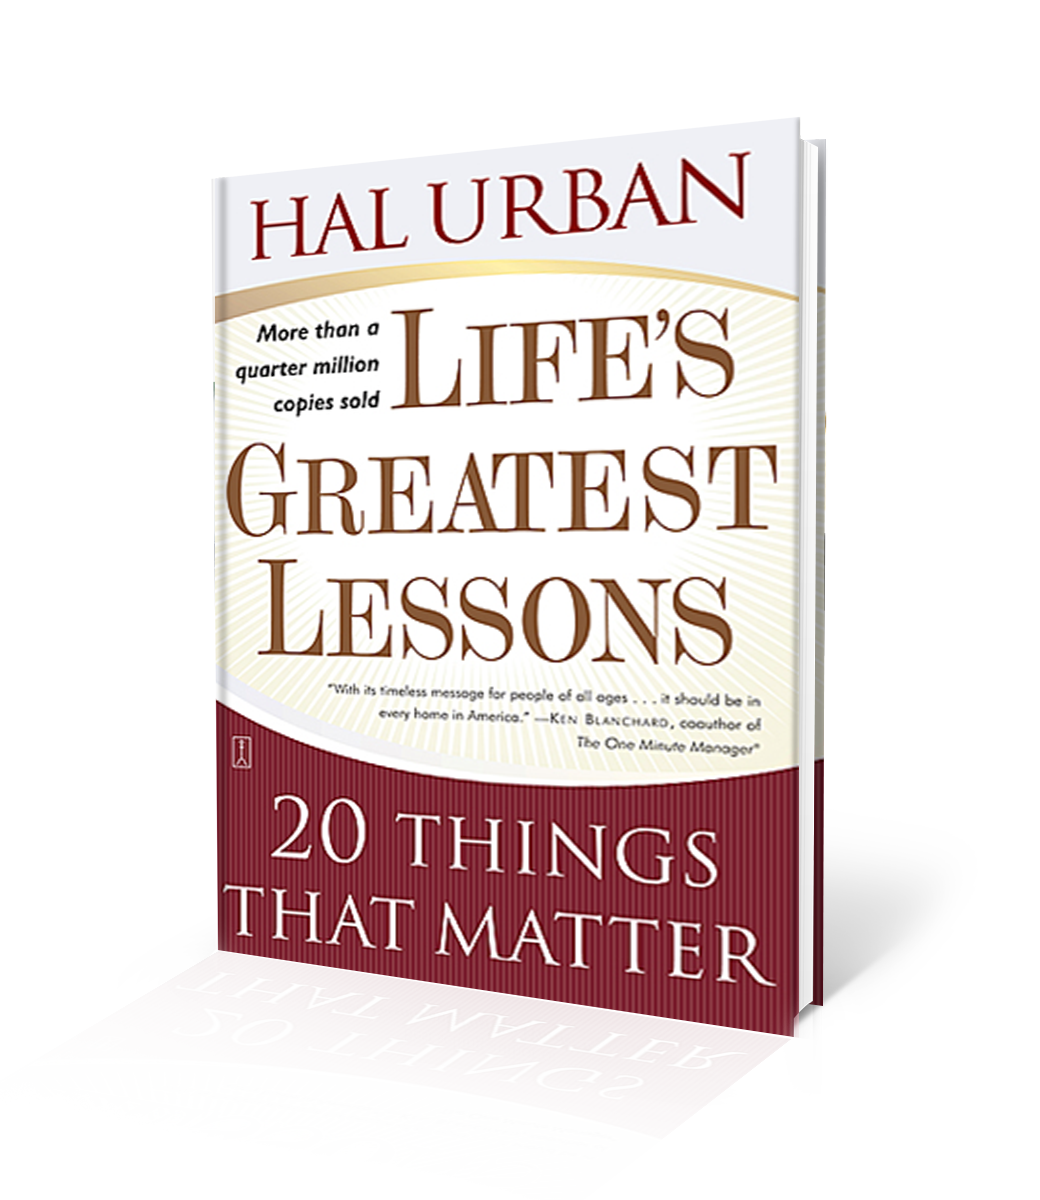 Life’s Greatest Lessons Hal Urban